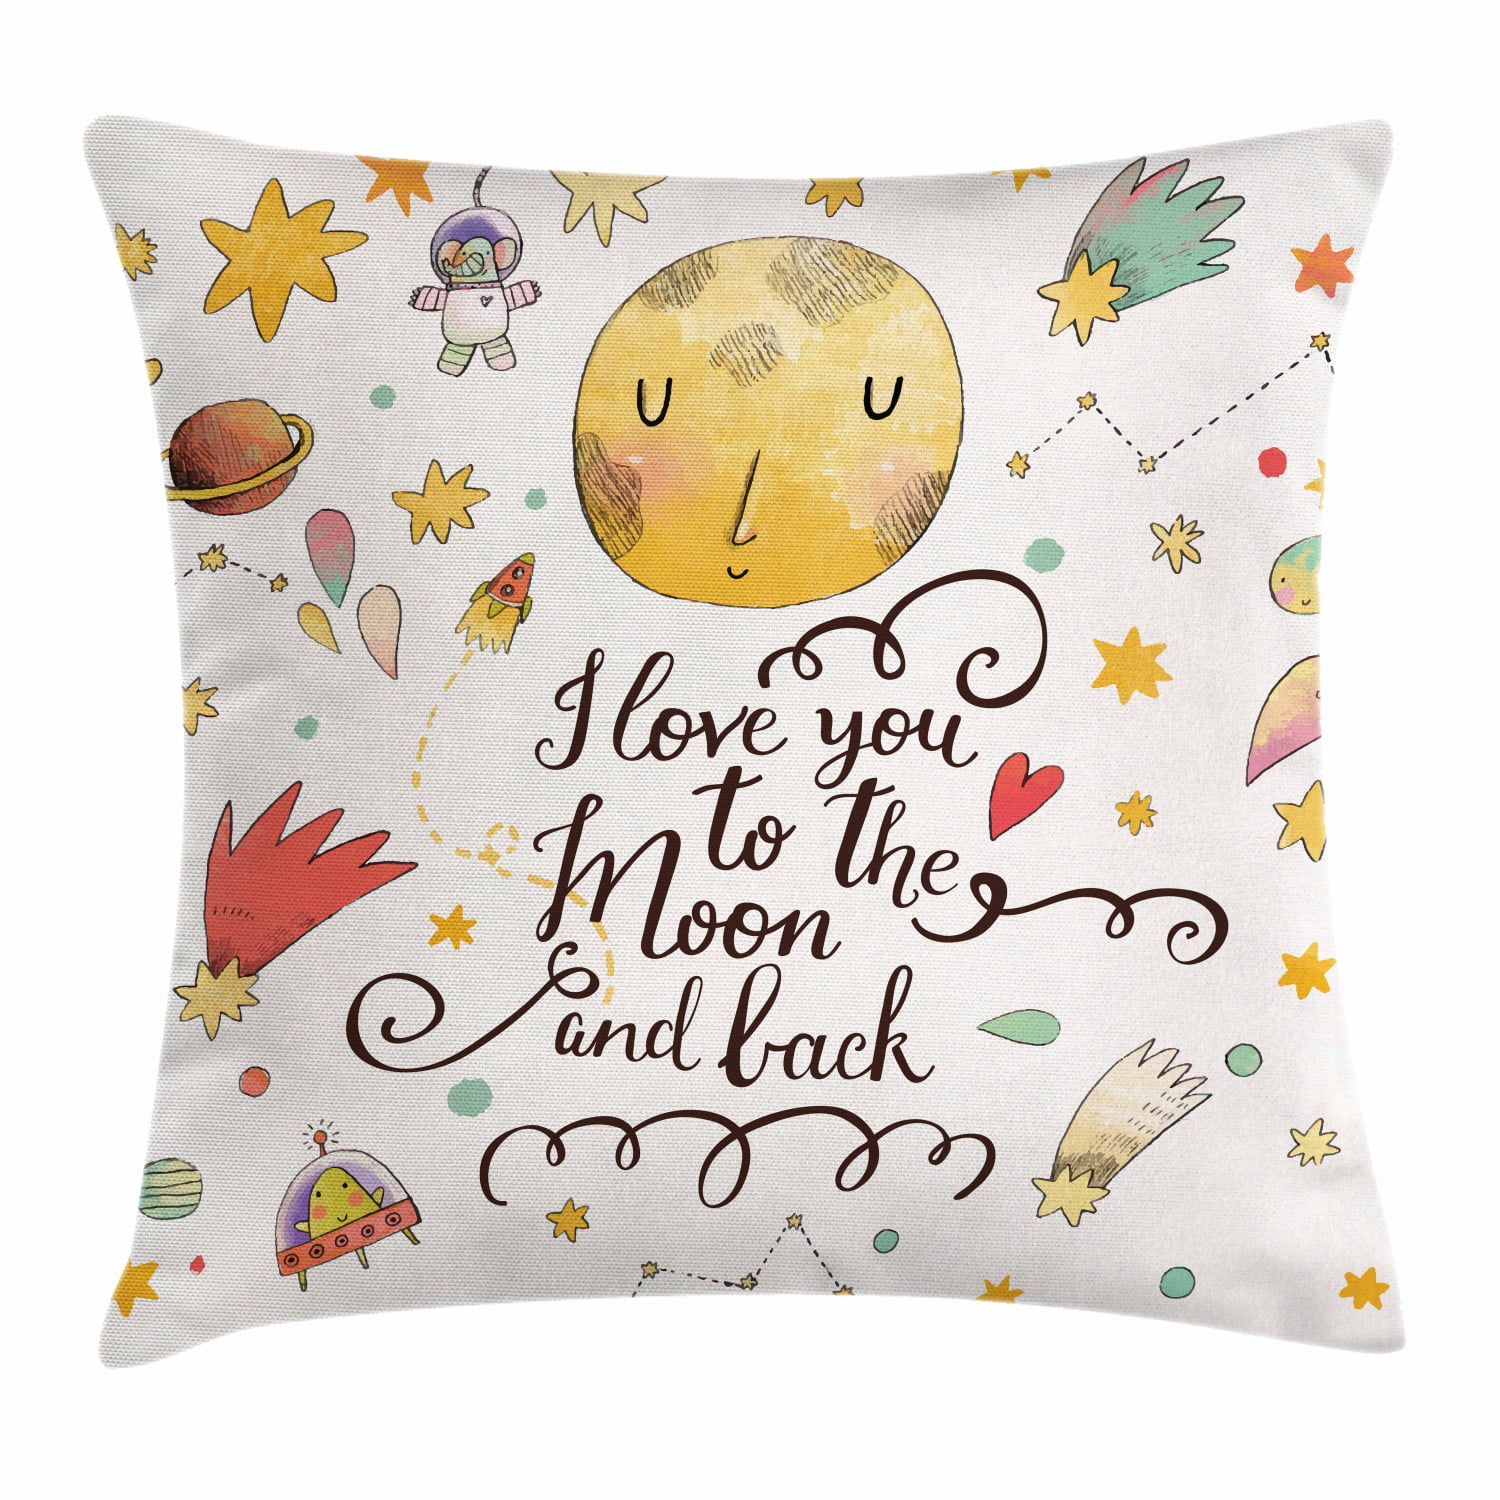 Quote Throw Pillow Cushion Cover Romantic Cartoon Style Celestial Elements With I Love You To The Moon And Back Slogan Decorative Square Accent Pillow Case 16 X 16 Inches Multicolor By Ambesonne